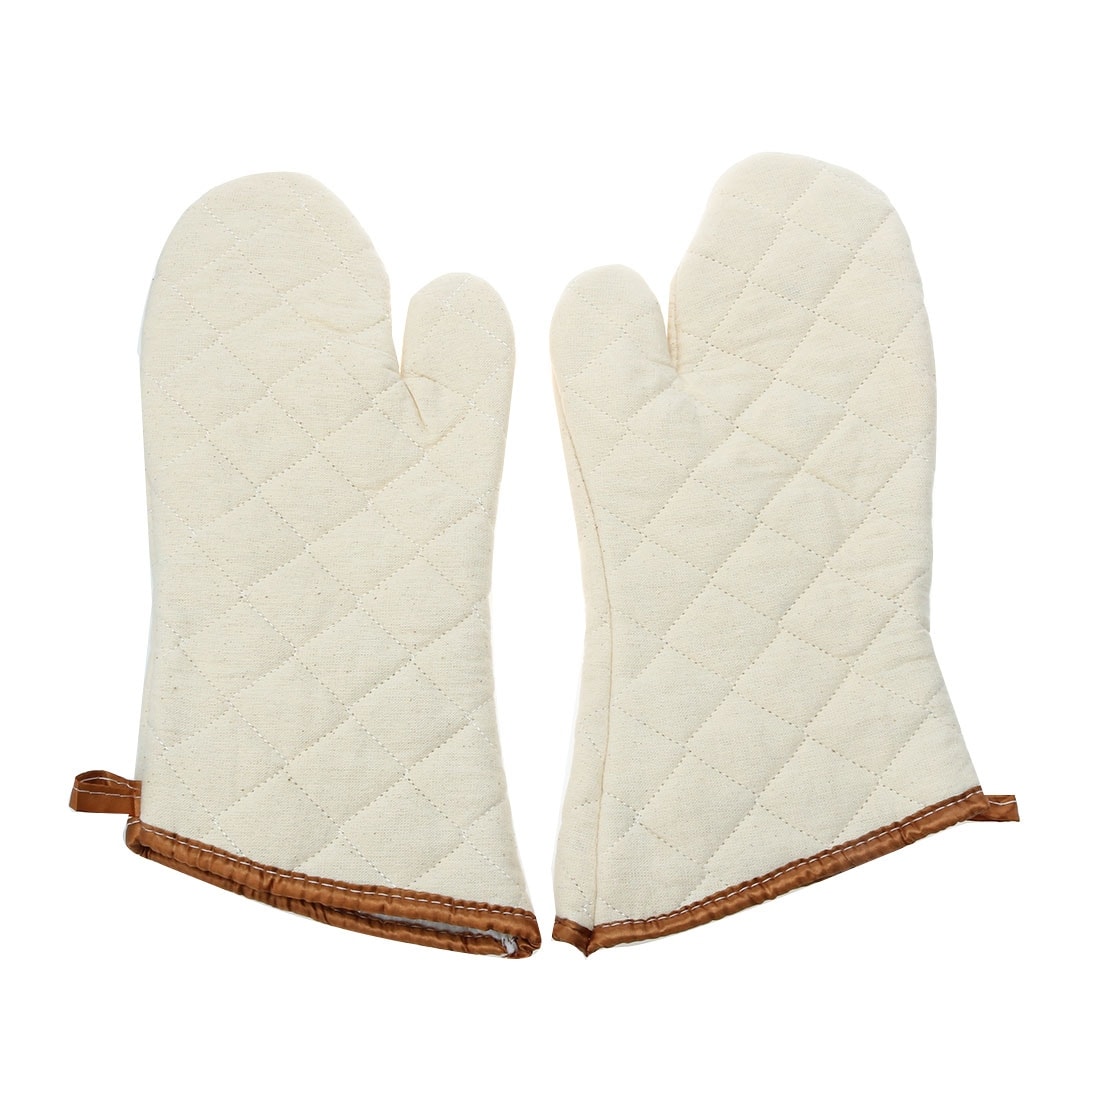 Bakery Heat Hot Resistance Microwave Grilling Baking Oven Mitt Gloves -  8.3 x 5.5(L*W) - Bed Bath & Beyond - 18354094